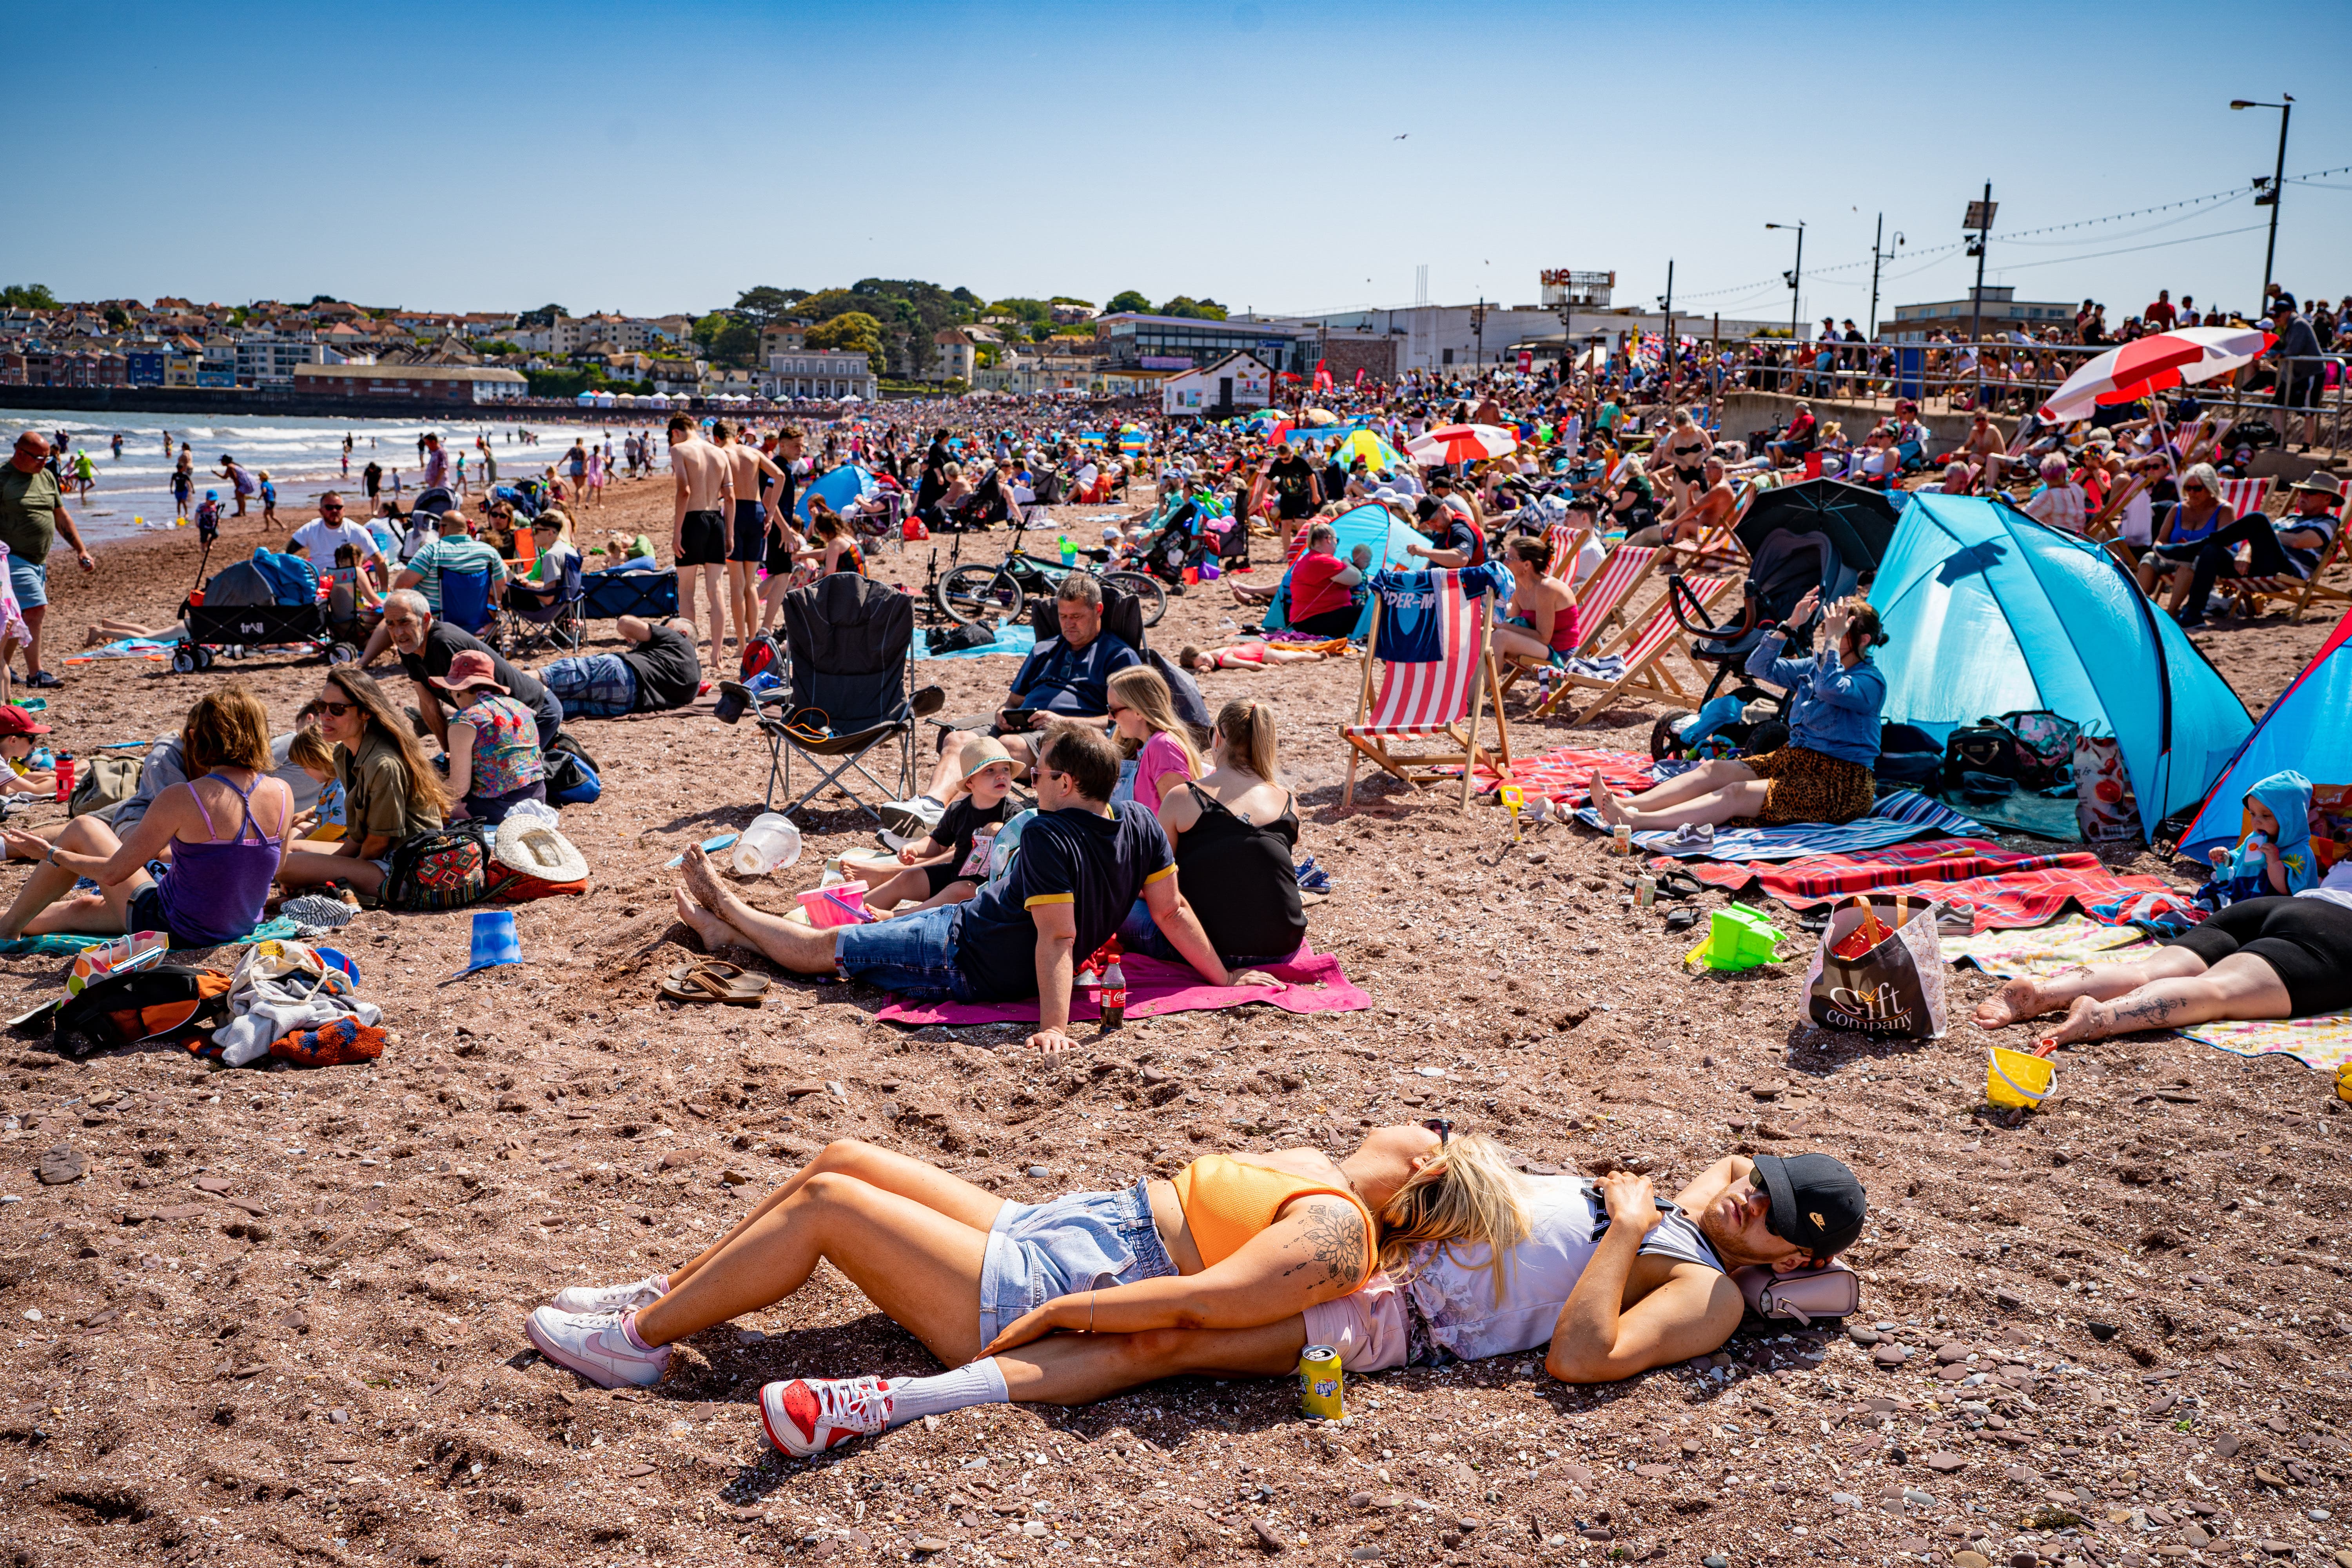 The UK is set for a mini heatwave next week